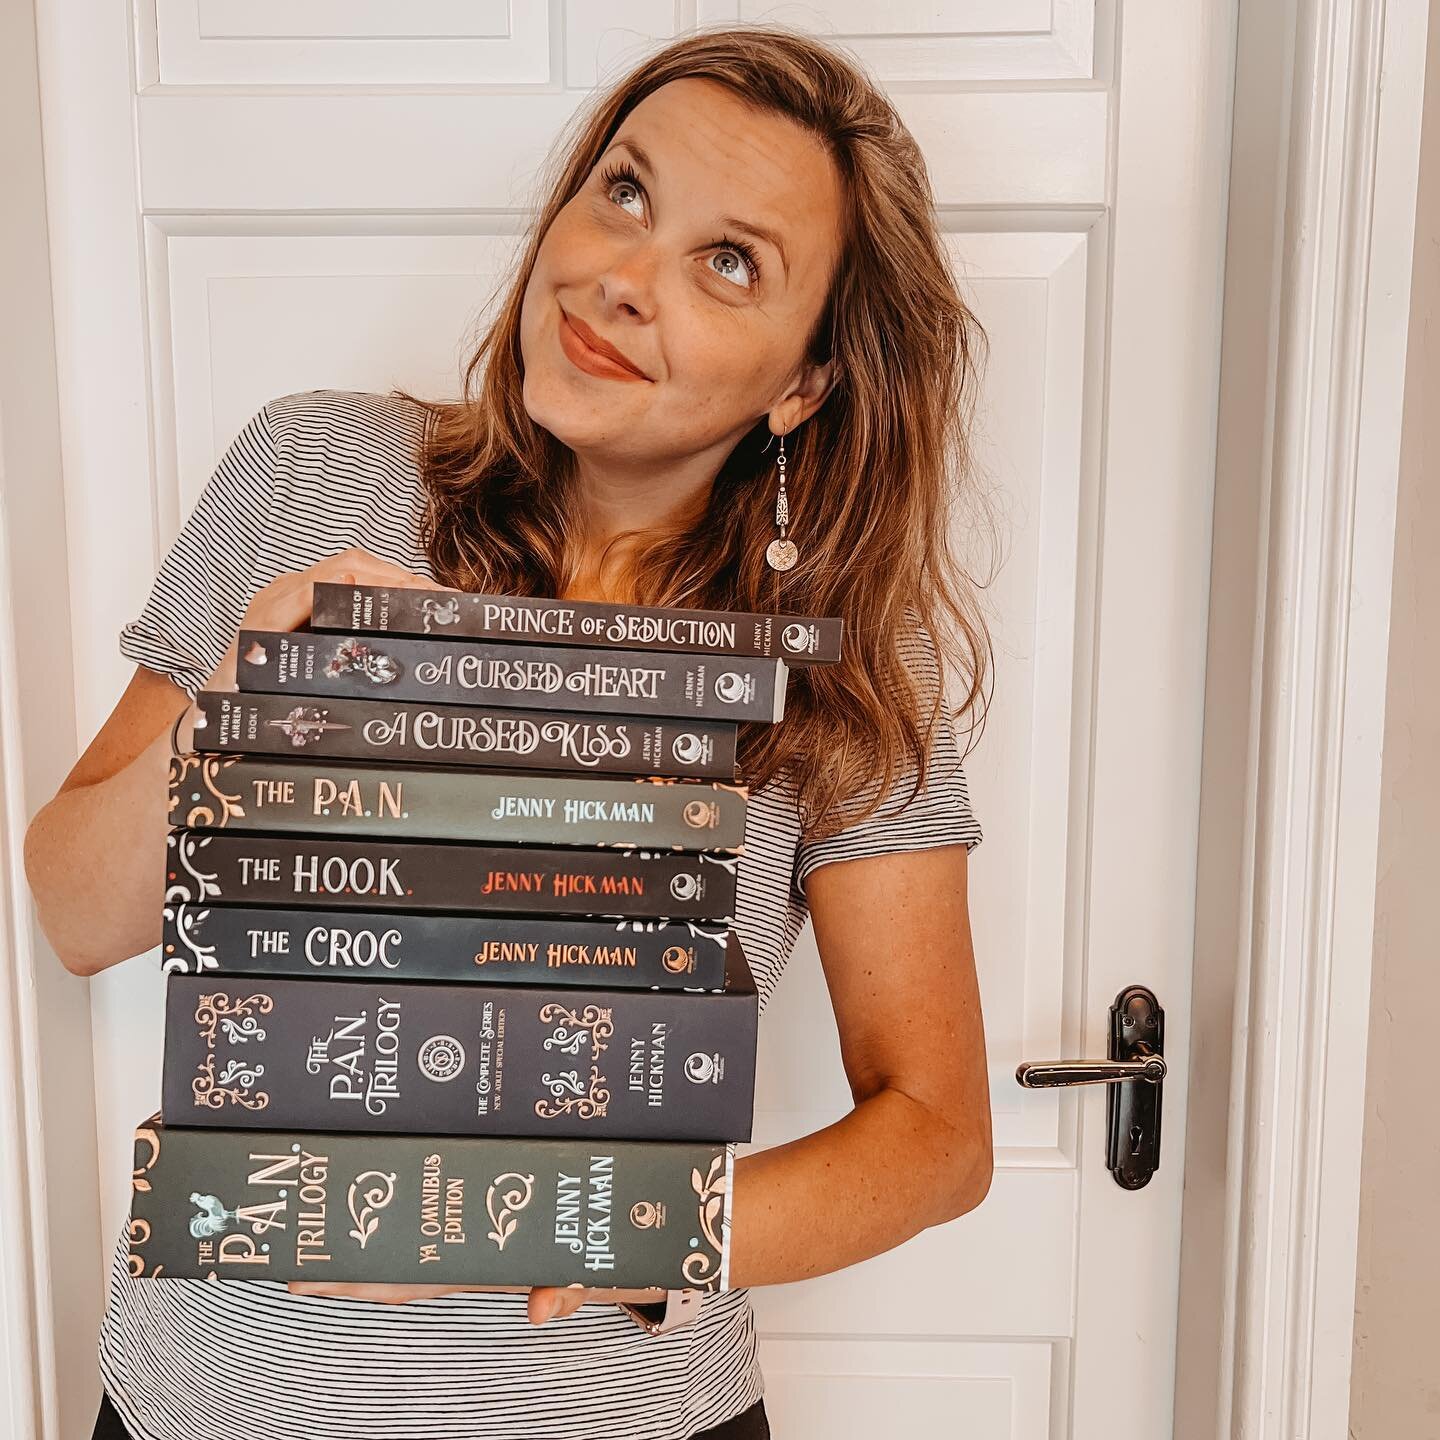 Oh hey! Look! It&rsquo;s me!

Welcome to all my new followers. Holy cow. What the heck is everyone doing here? 

Since there are so many of you, I may as well introduce myself. My name is Jenny. I write romance novels with banter + swoon and read all